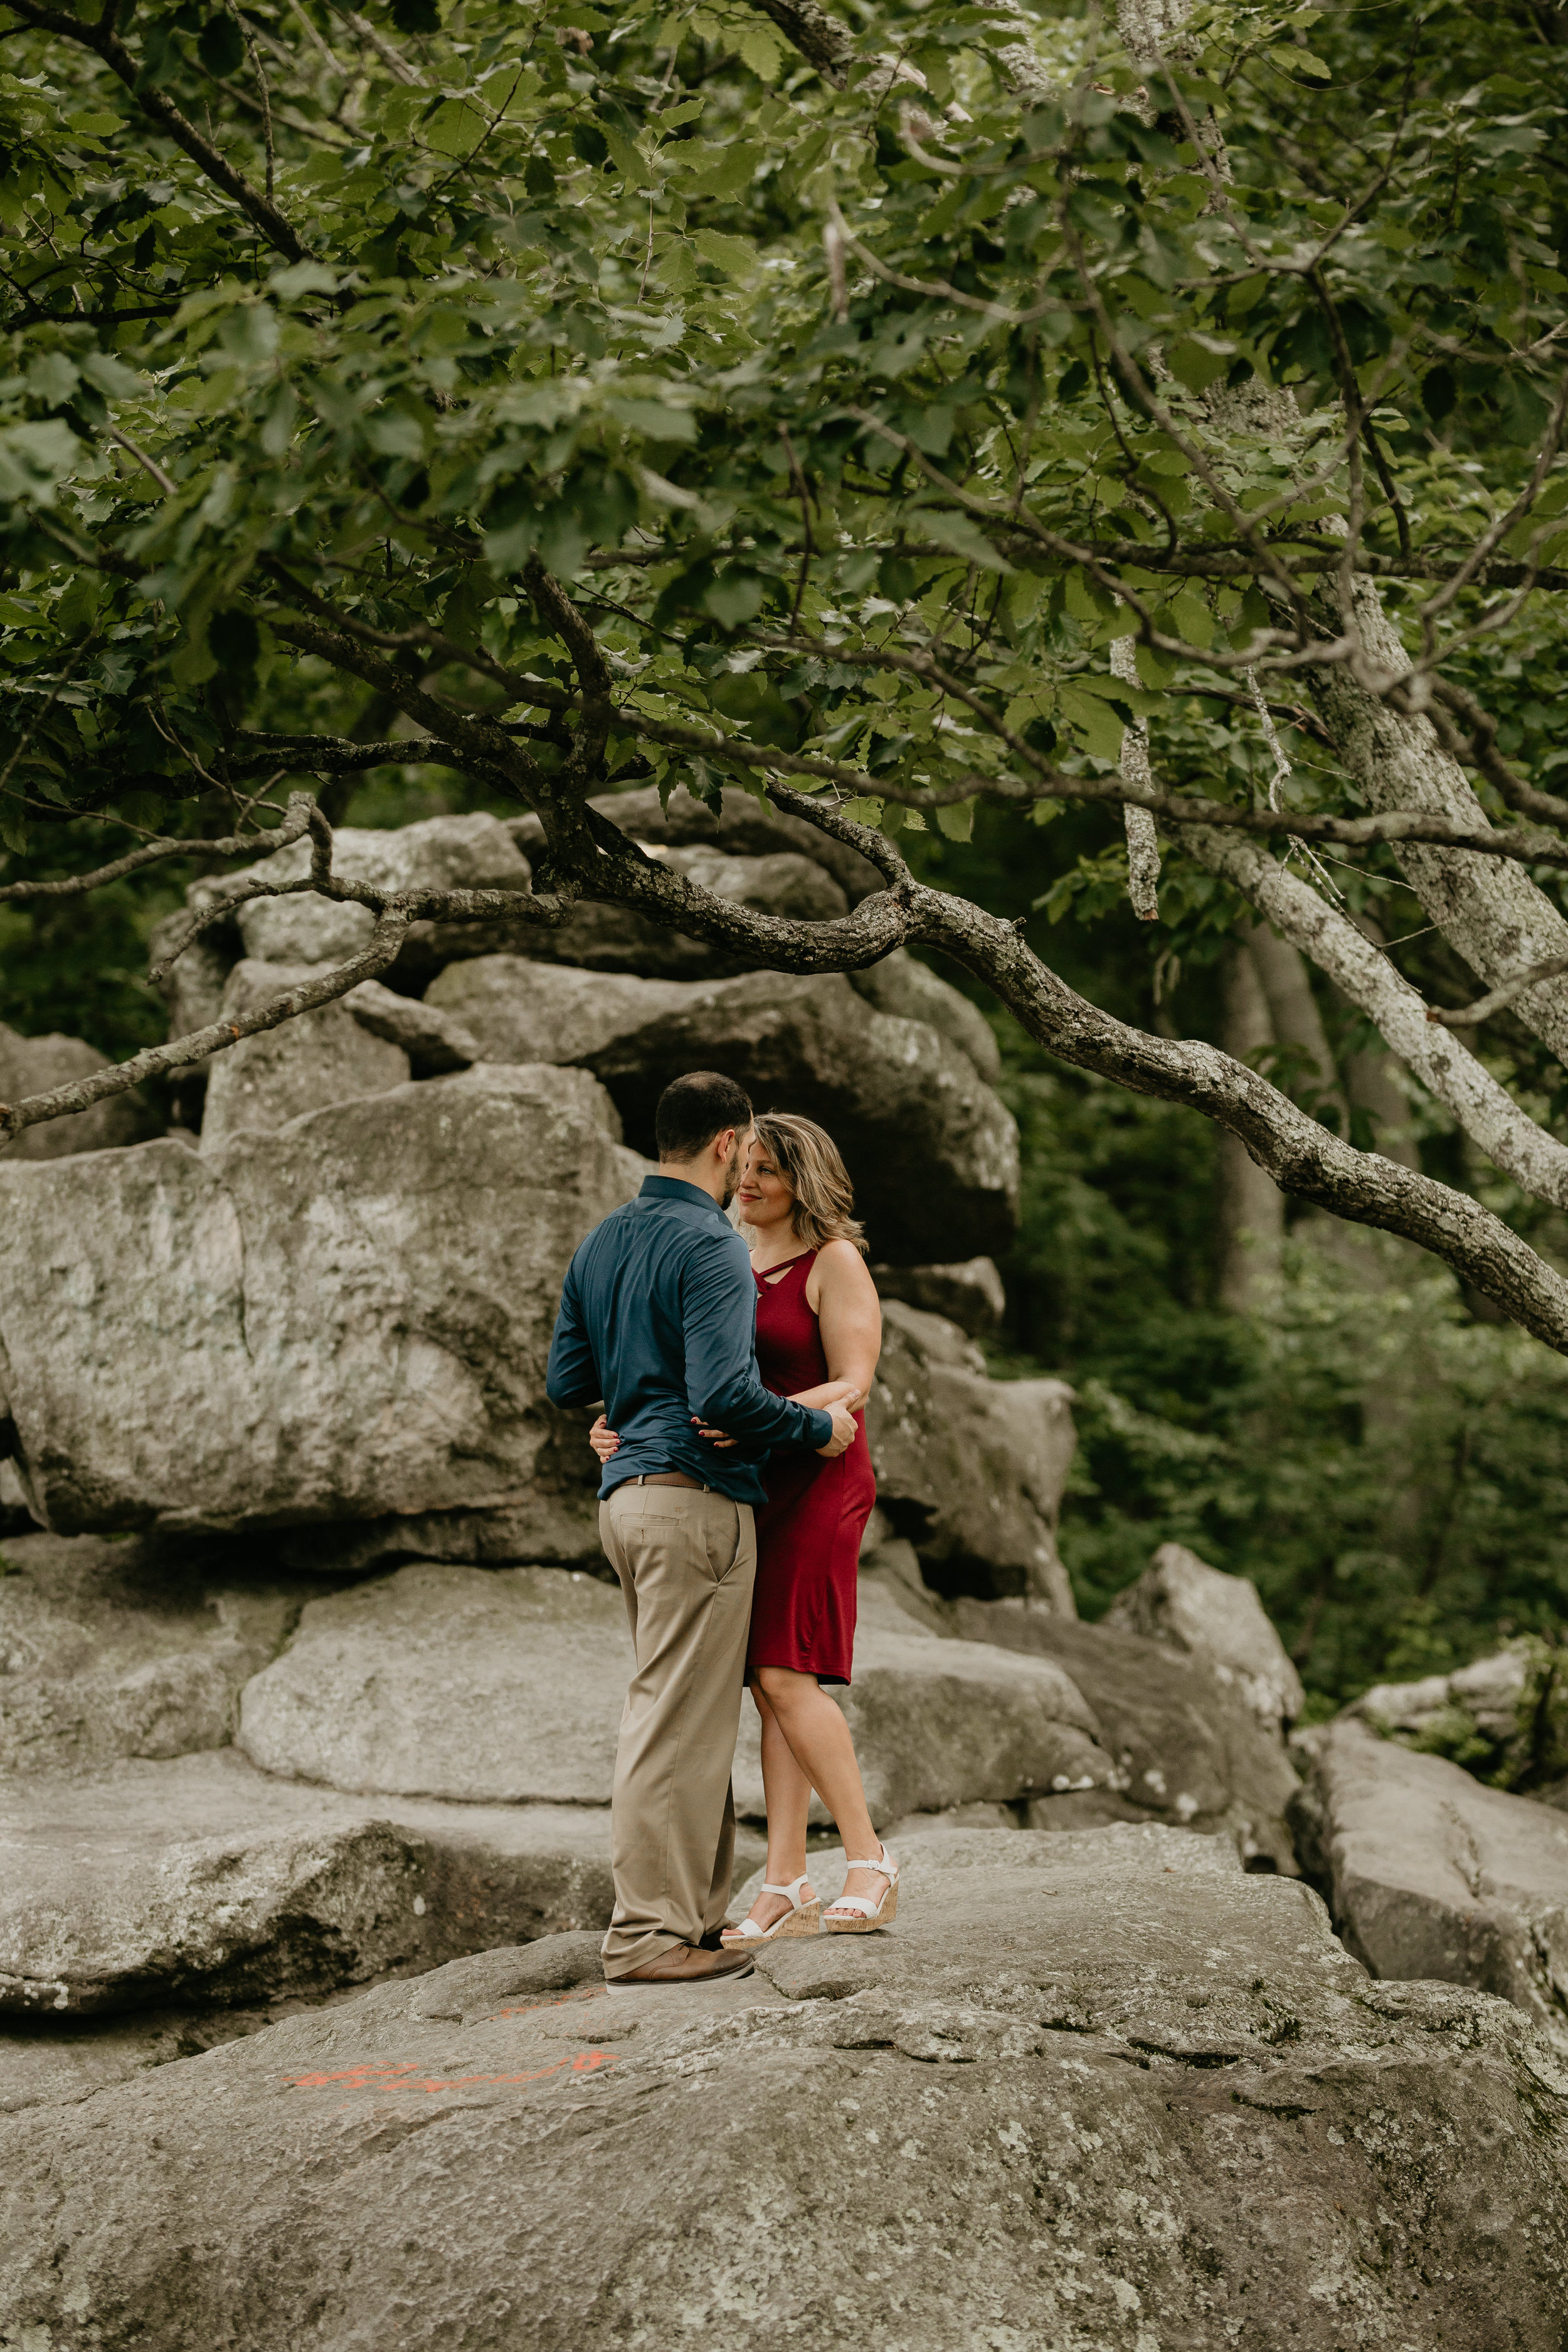 Nicole-Daacke-Photography-rock-state-park-overlook-king-queen-seat-maryland-hiking-adventure-engagement-session-photos-portraits-summer-bel-air-dog-engagement-session-17.jpg